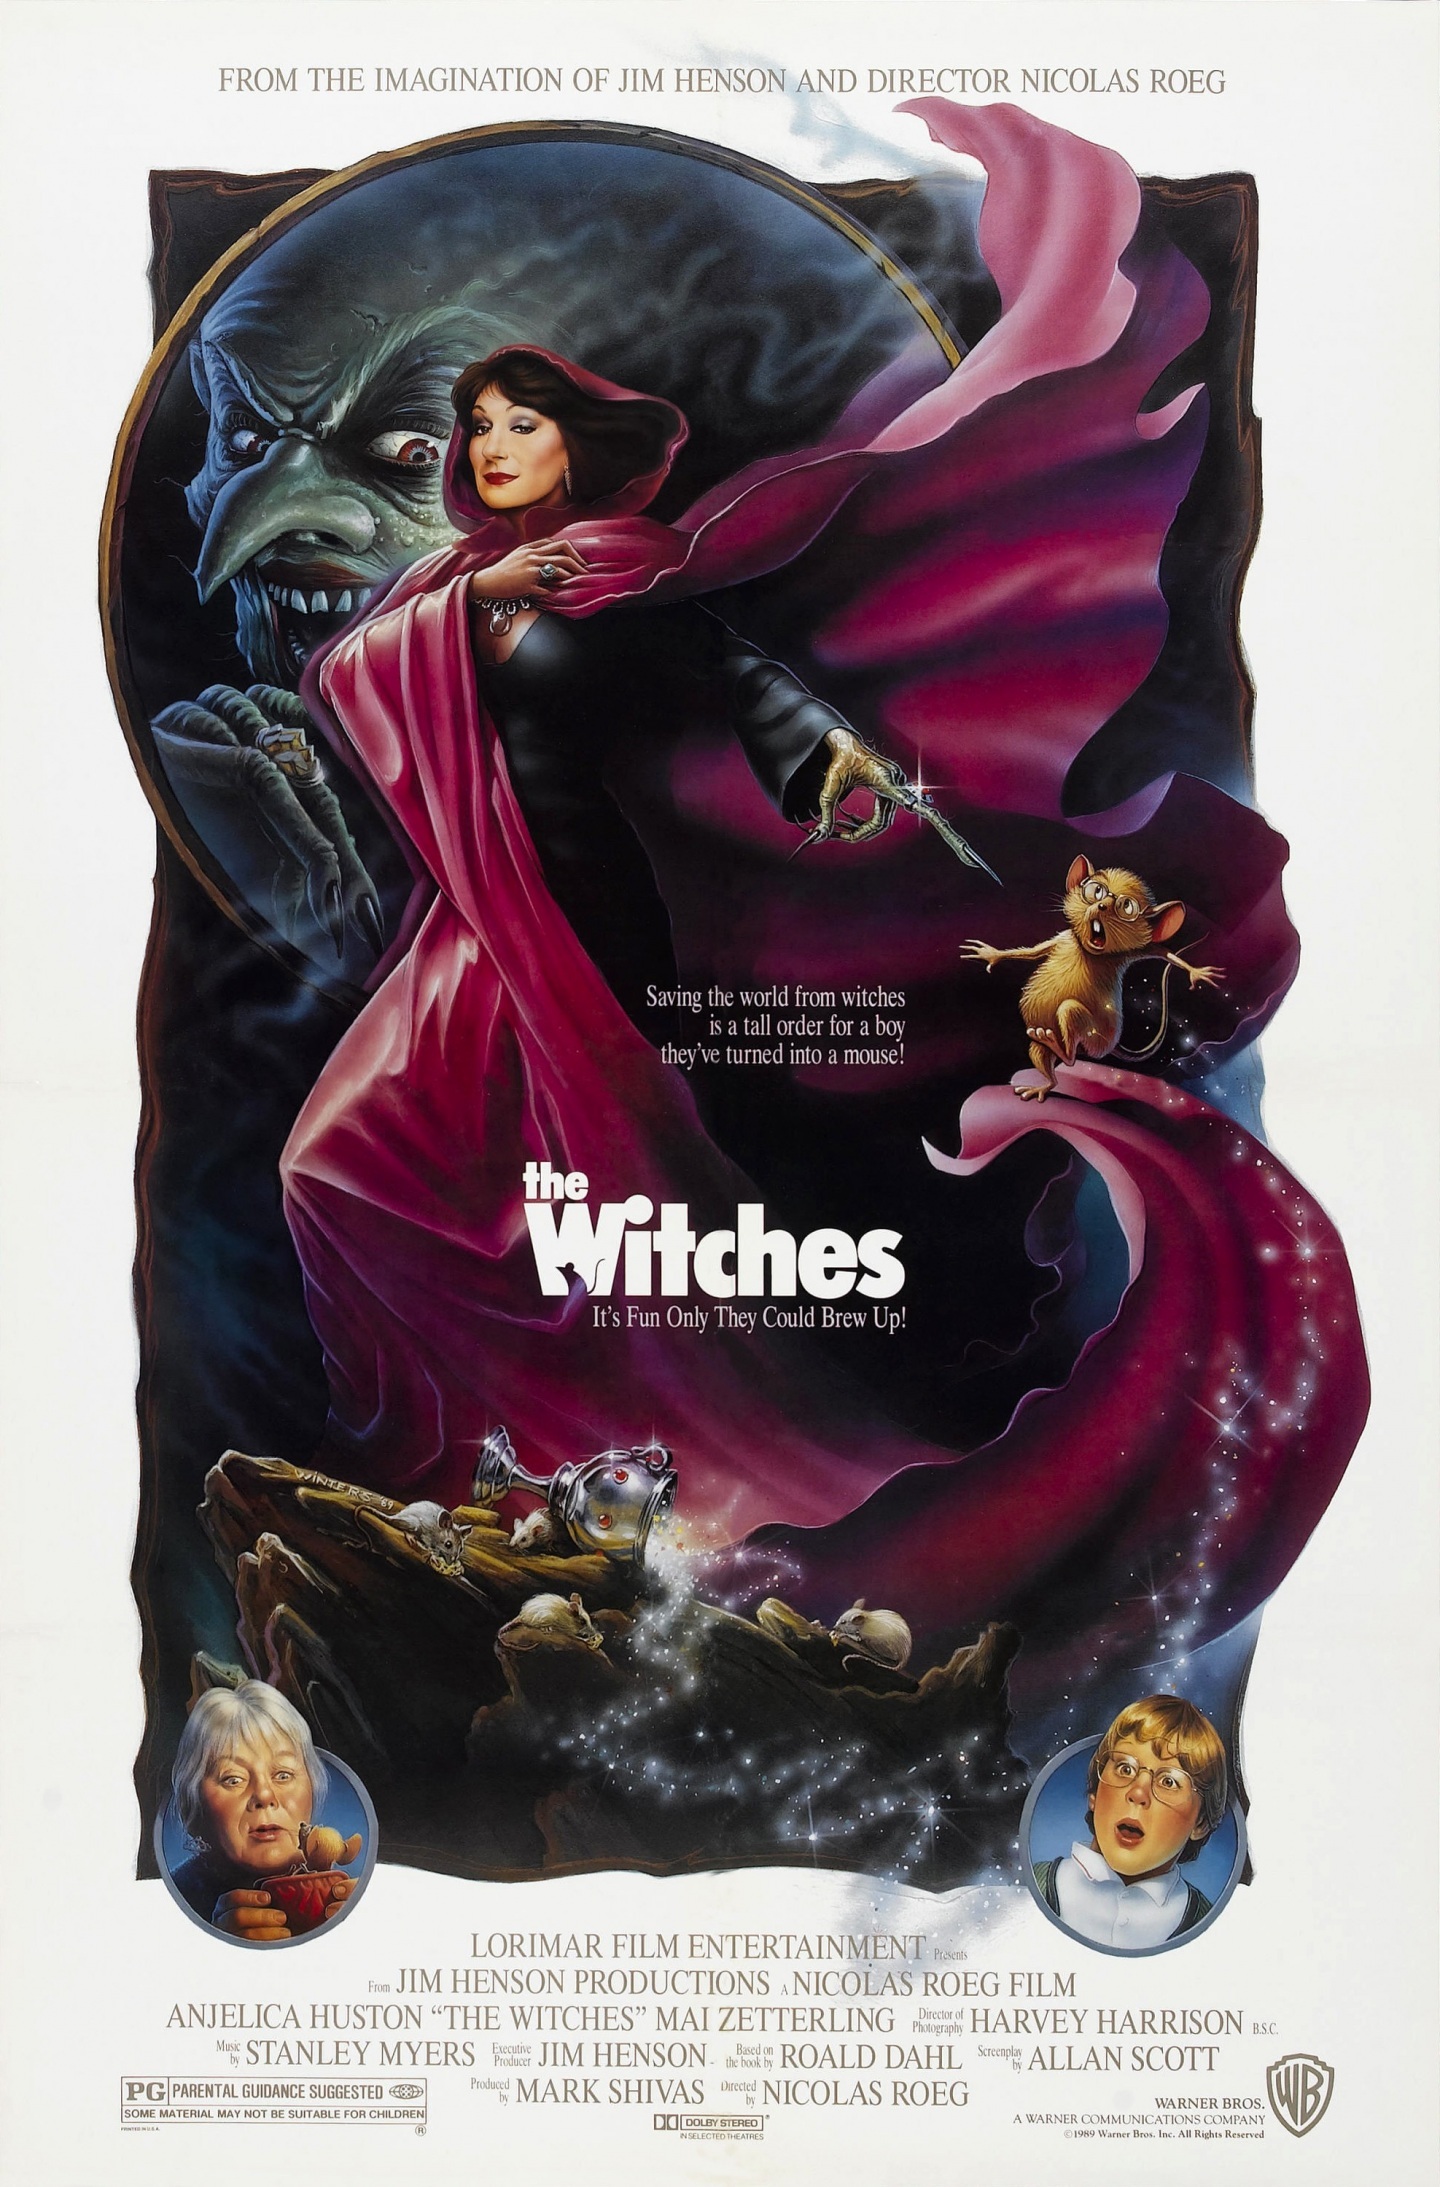 The Witches | Warner Bros. Entertainment Wiki | FANDOM powered by Wikia